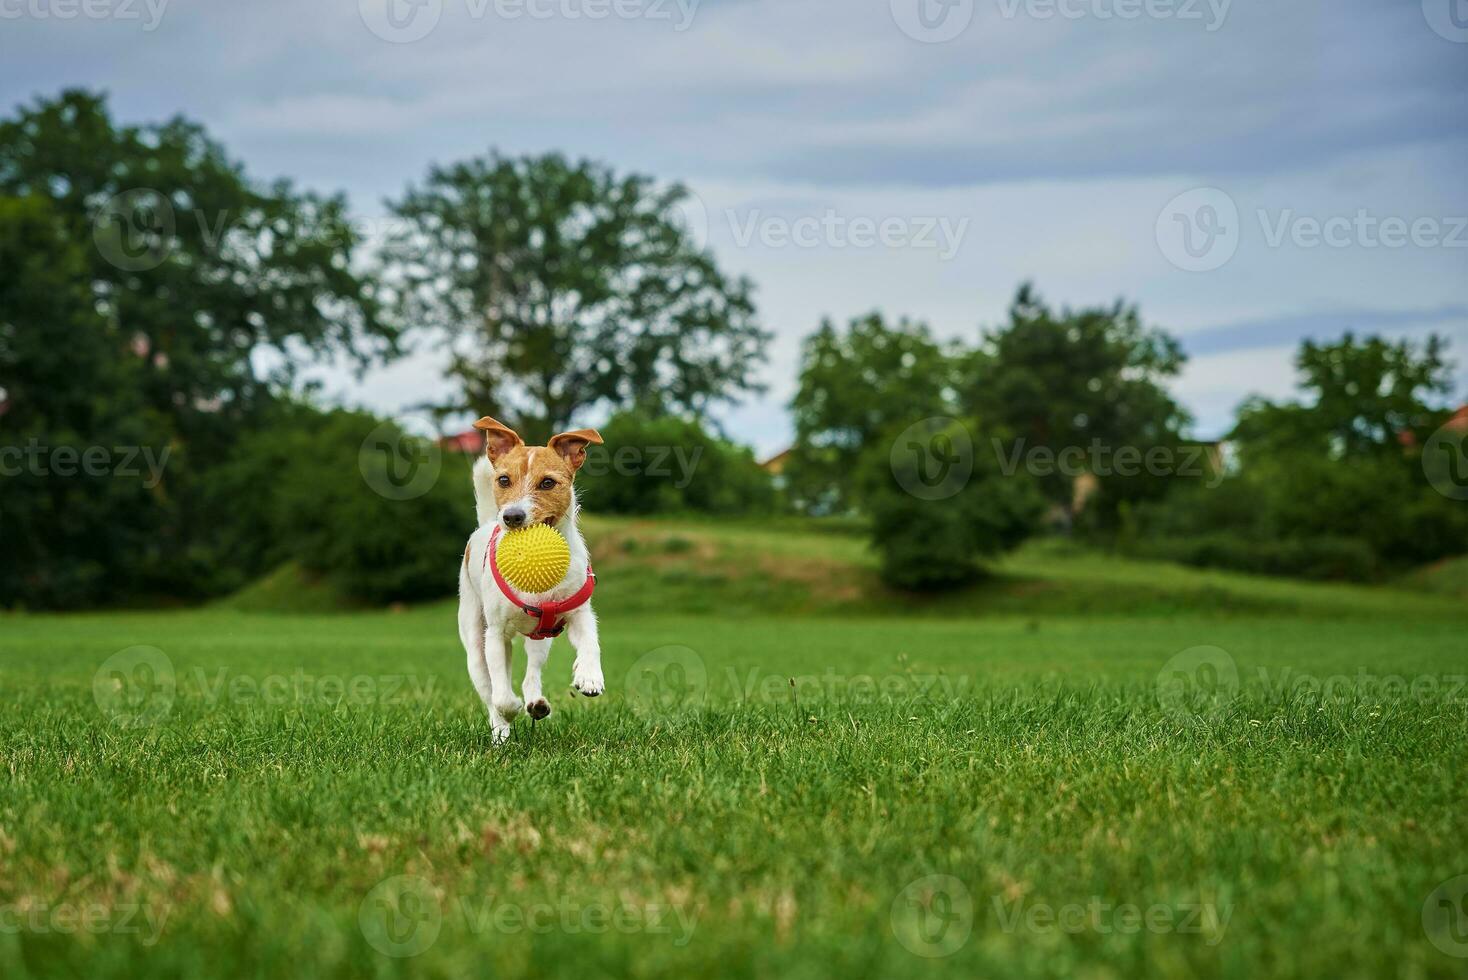 Cute dog walking at green grass, playing with toy ball photo